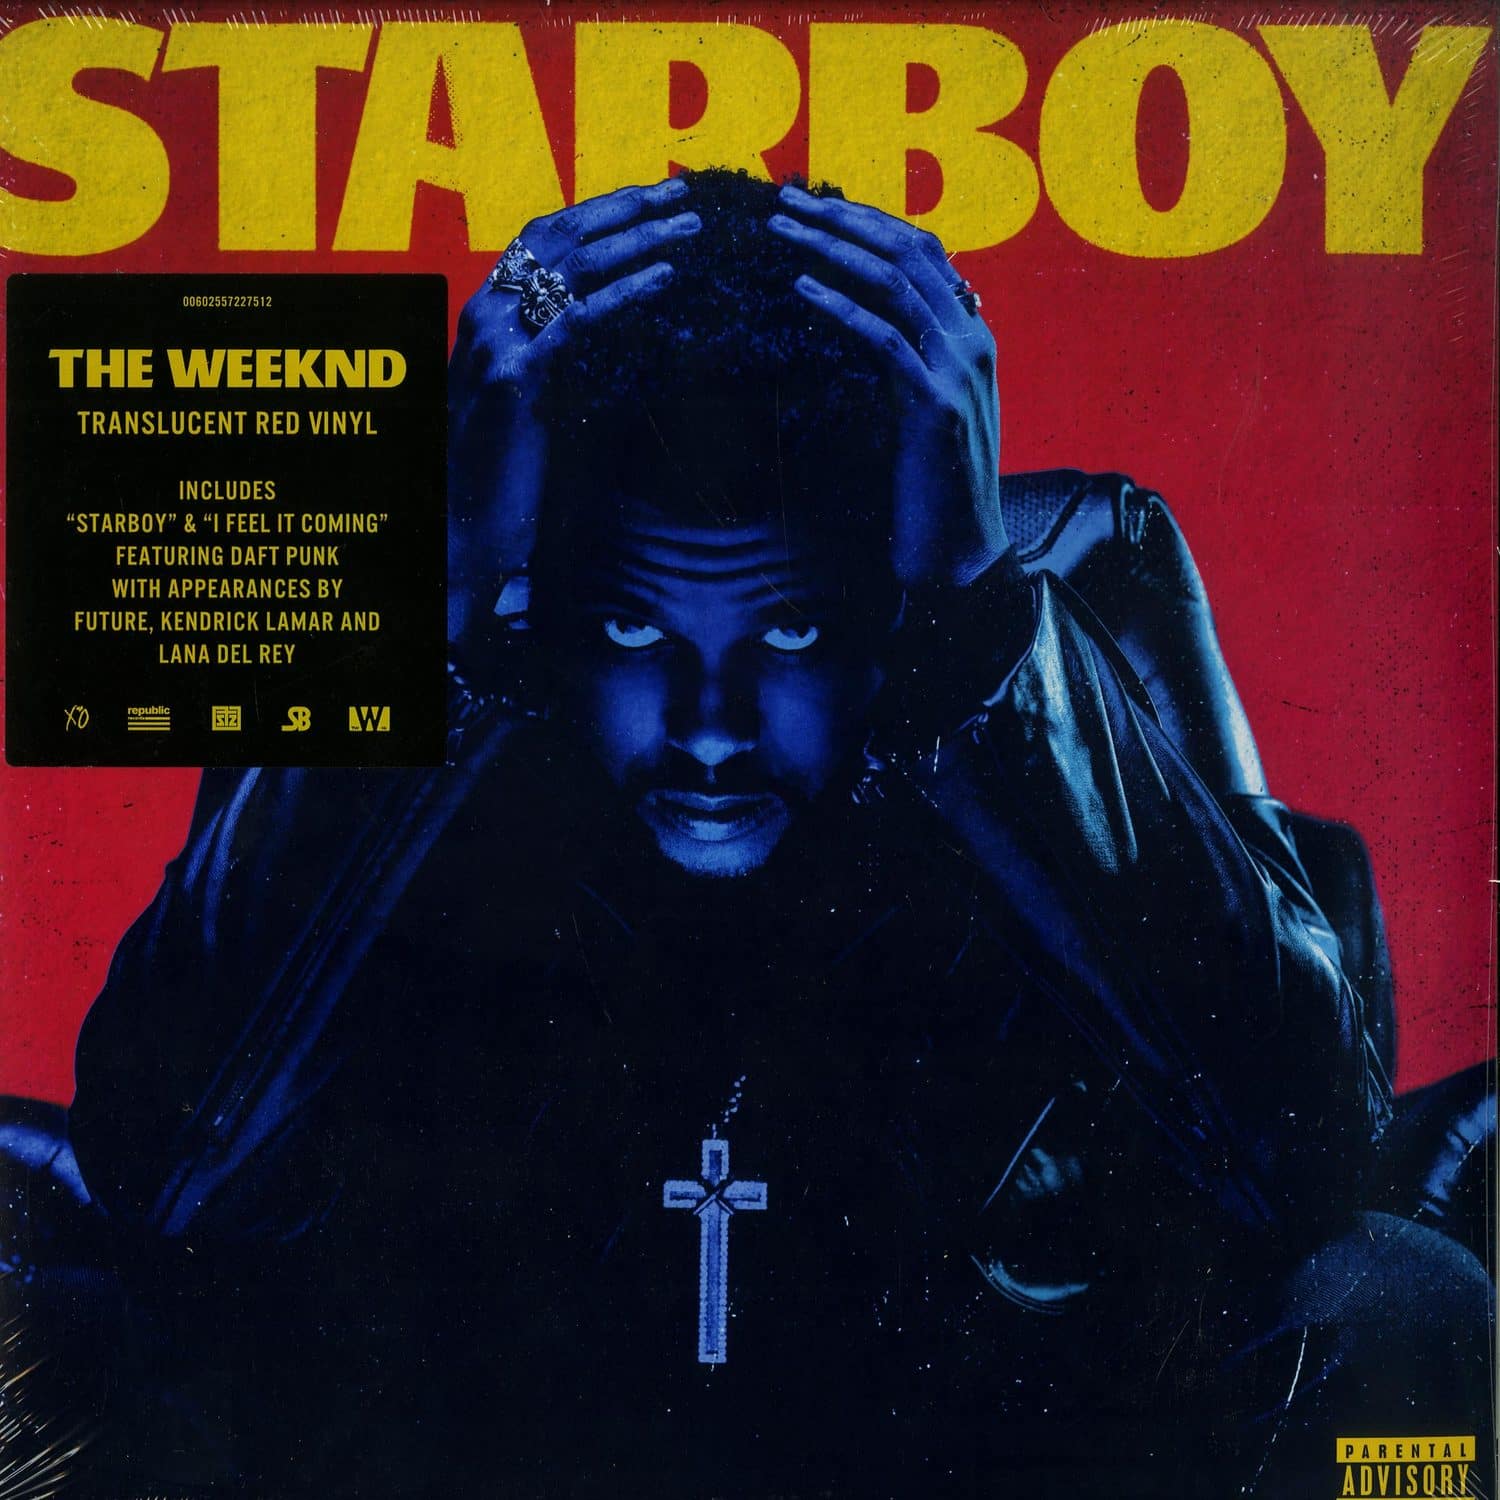 The Weeknd - STARBOY 